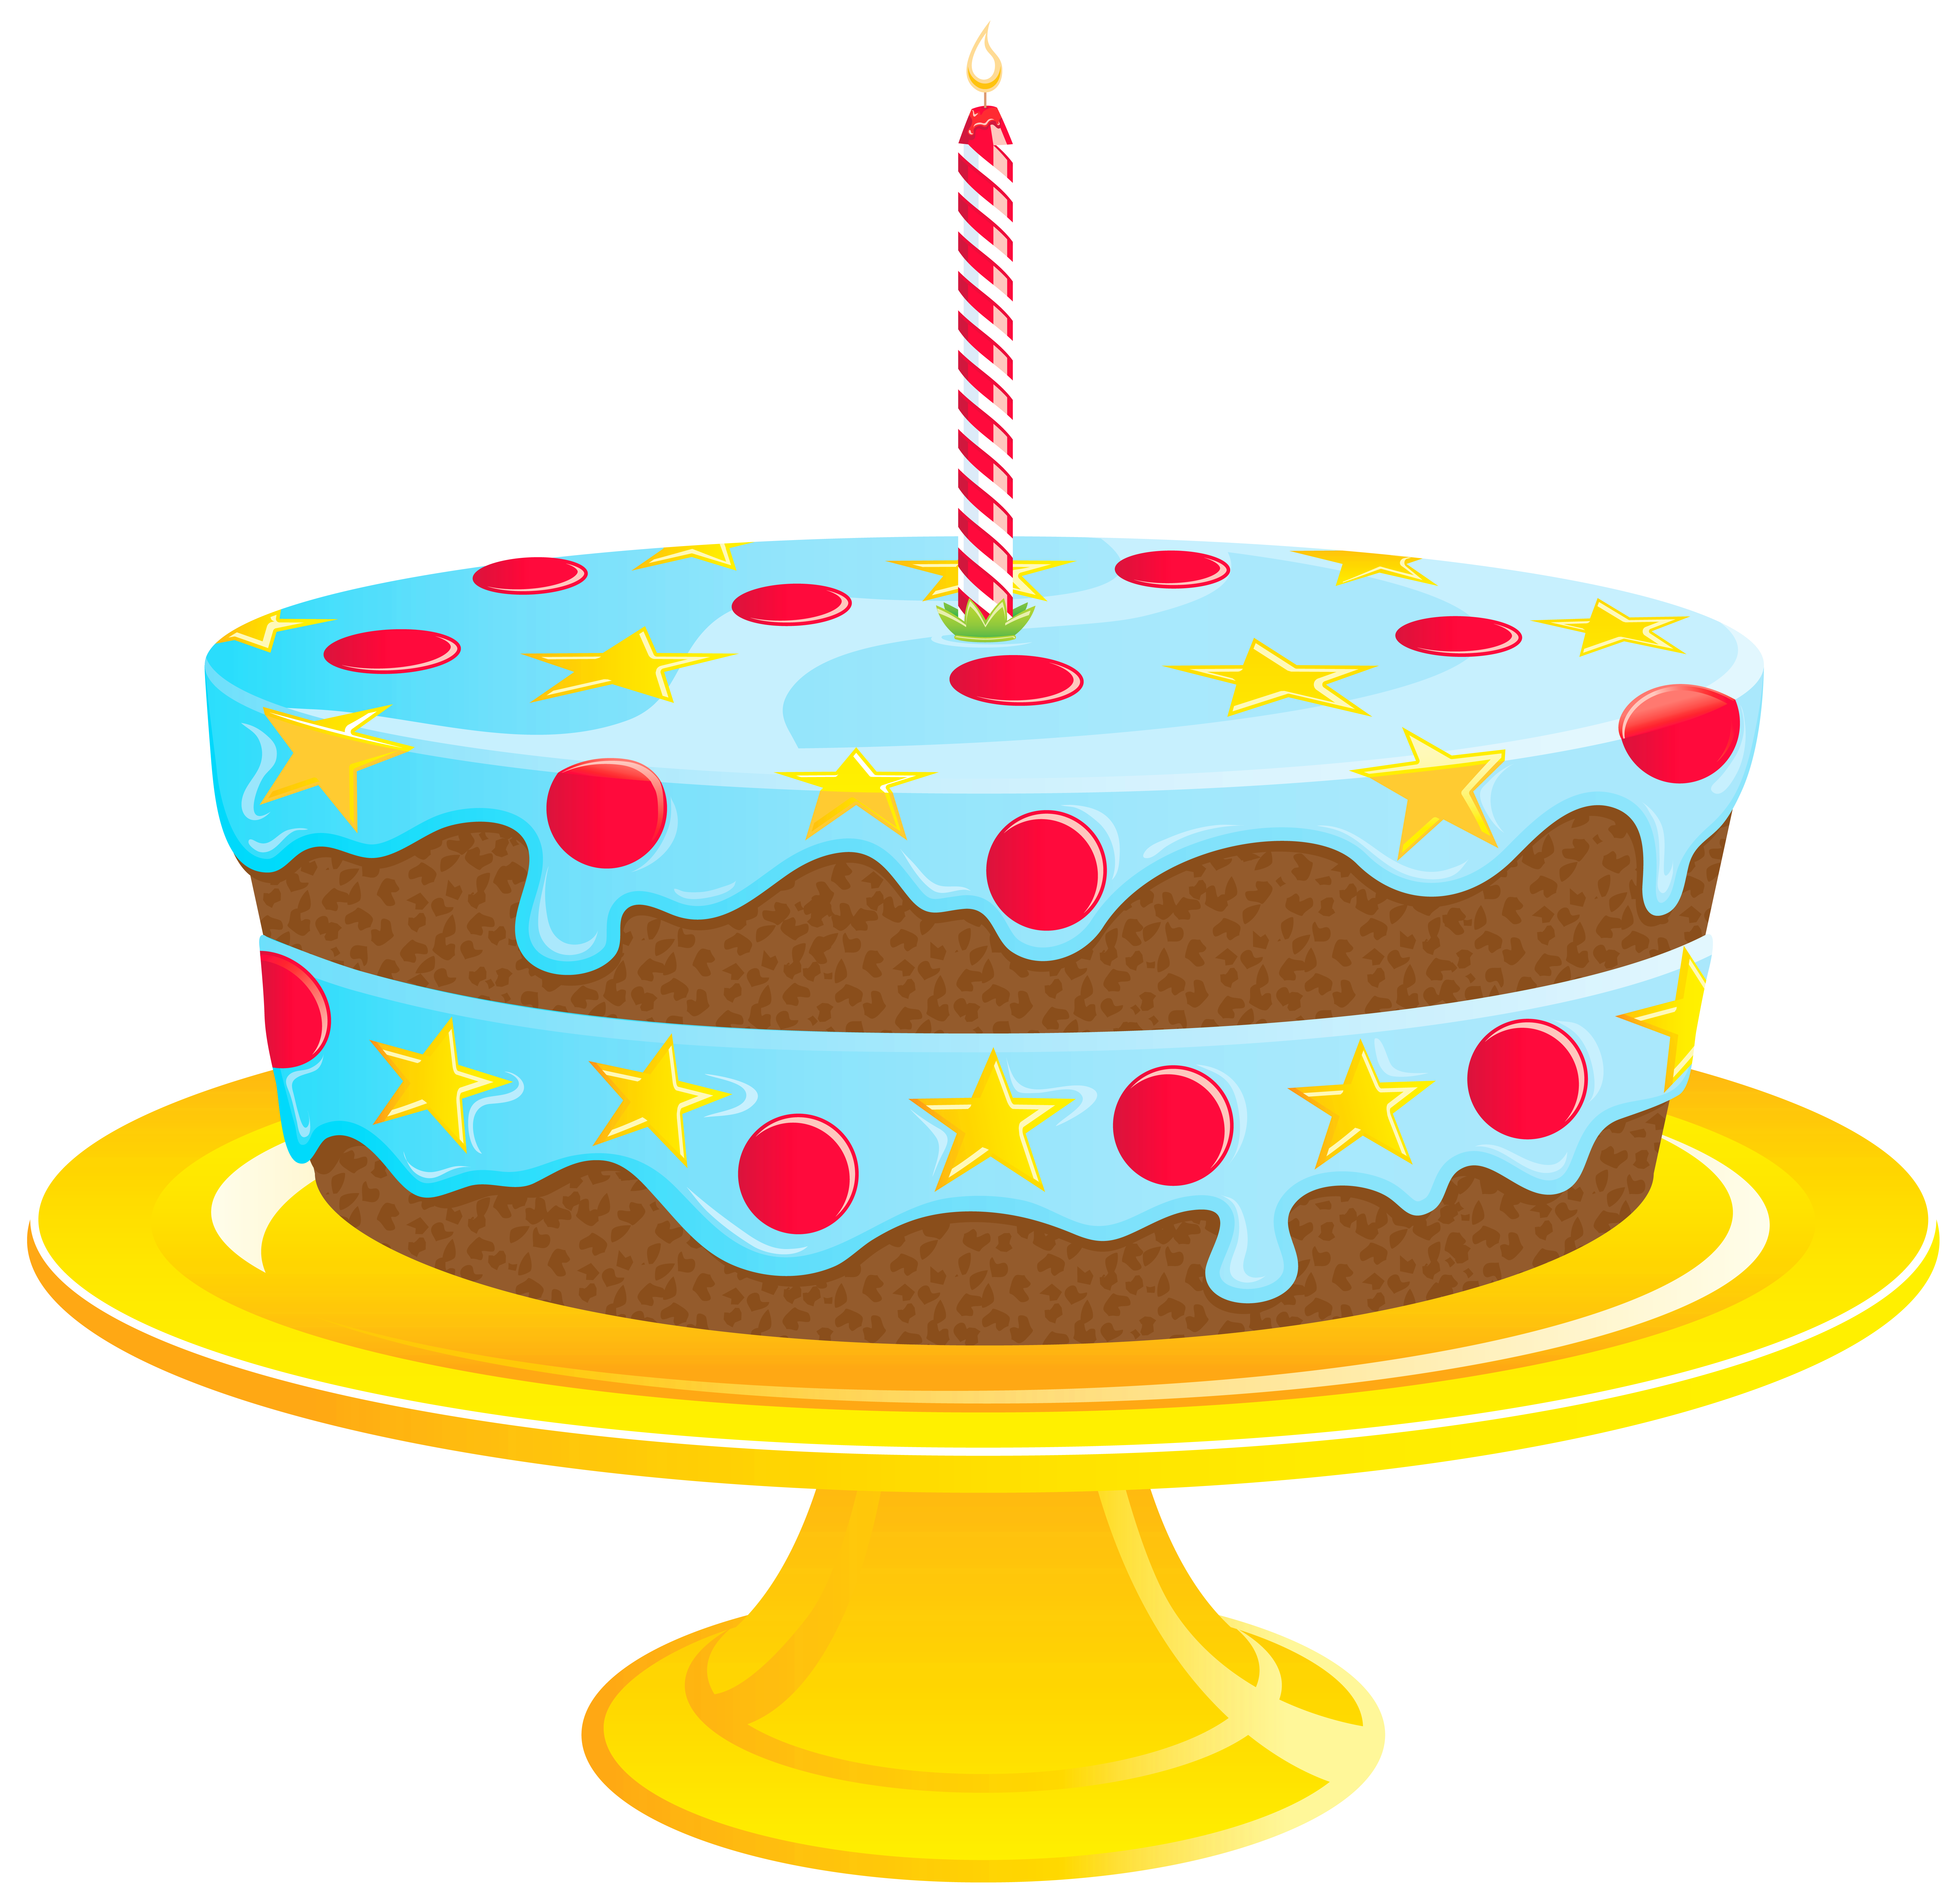 Blue Birthday Cake PNG Clipart